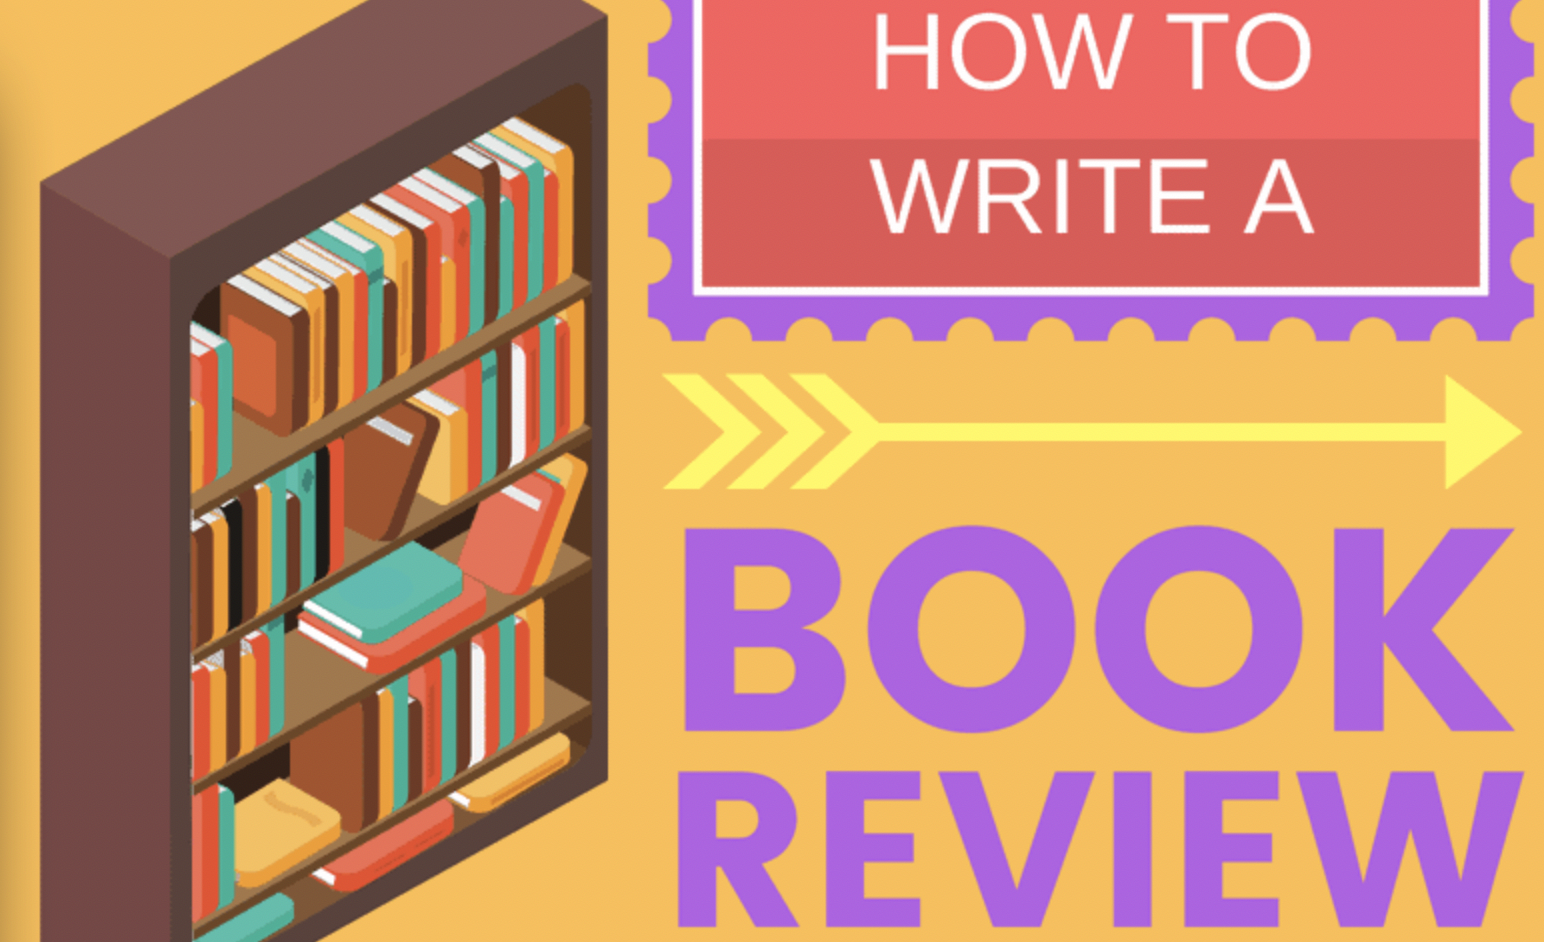 How to write a book review